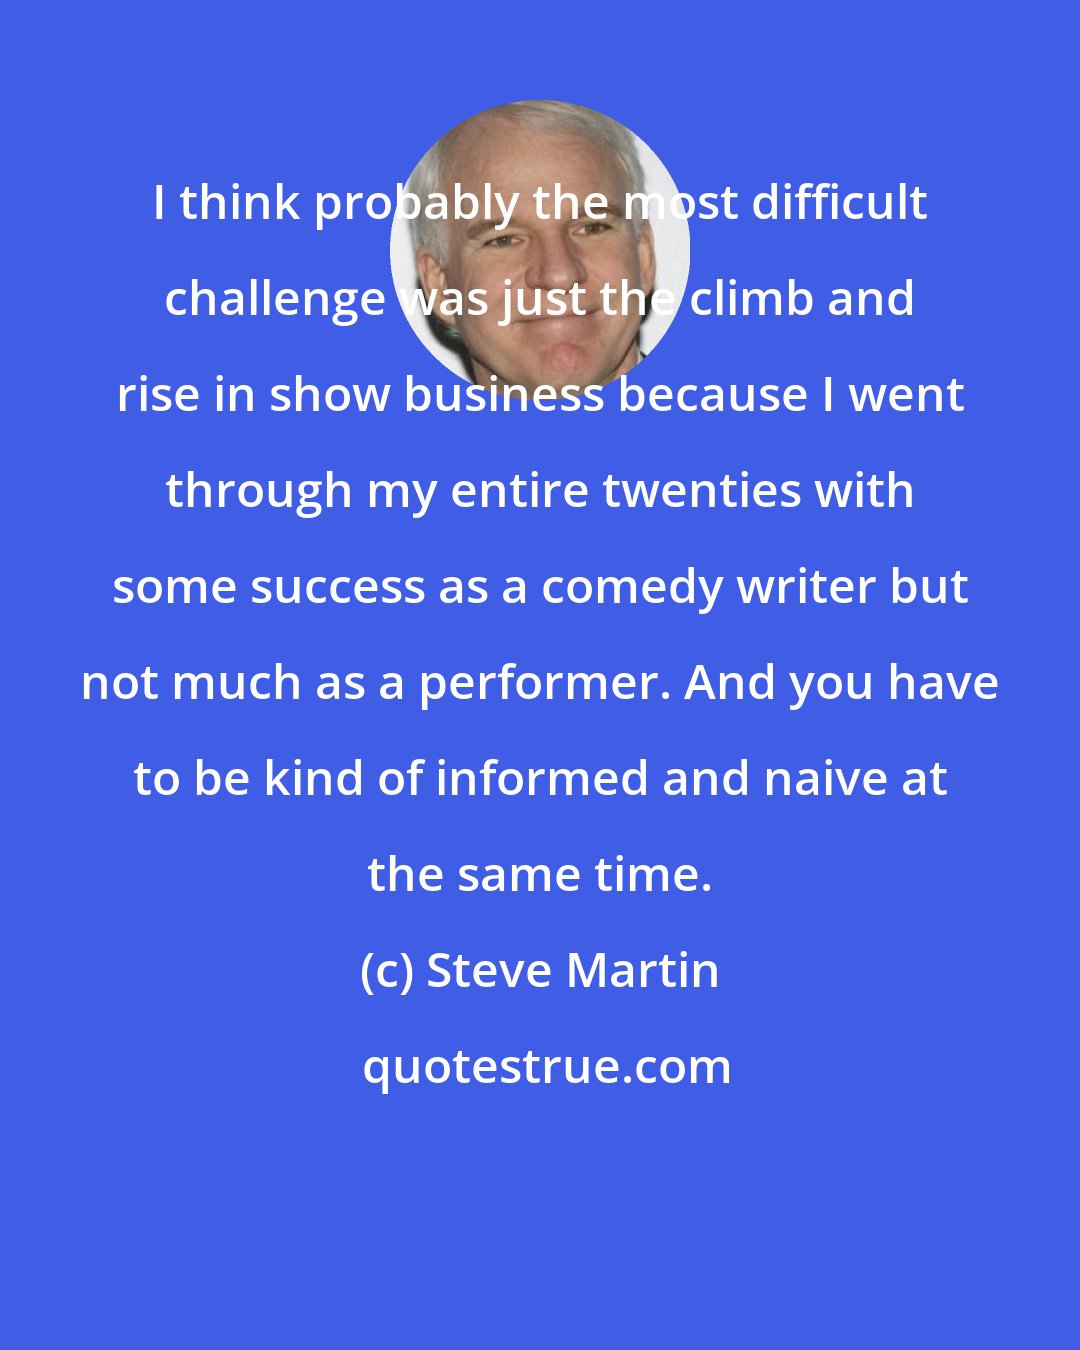 Steve Martin: I think probably the most difficult challenge was just the climb and rise in show business because I went through my entire twenties with some success as a comedy writer but not much as a performer. And you have to be kind of informed and naive at the same time.